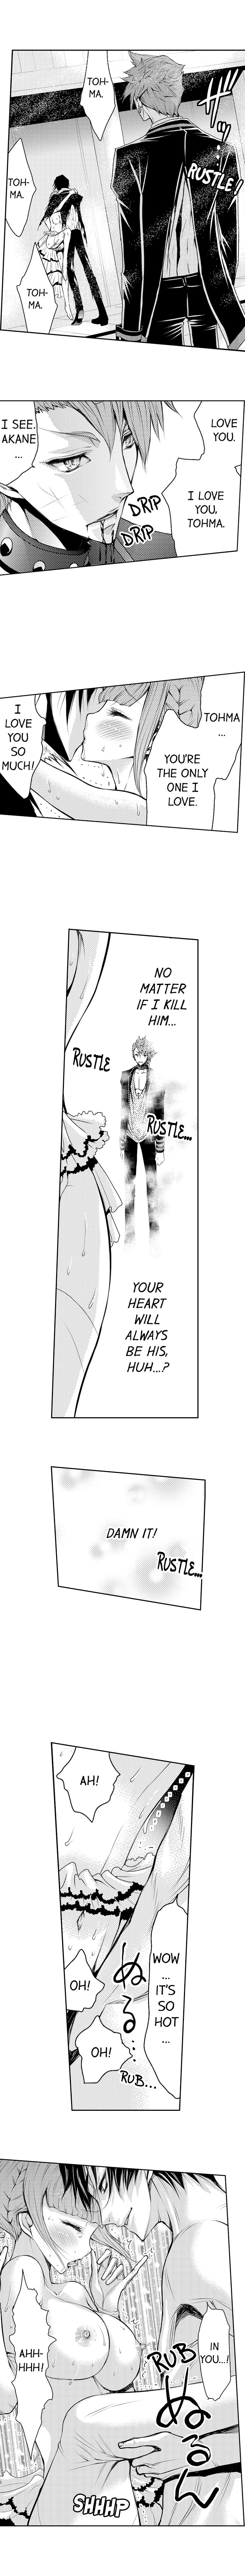 A Virgin Offering for the God of Death: Forbidden Conception Ch.21